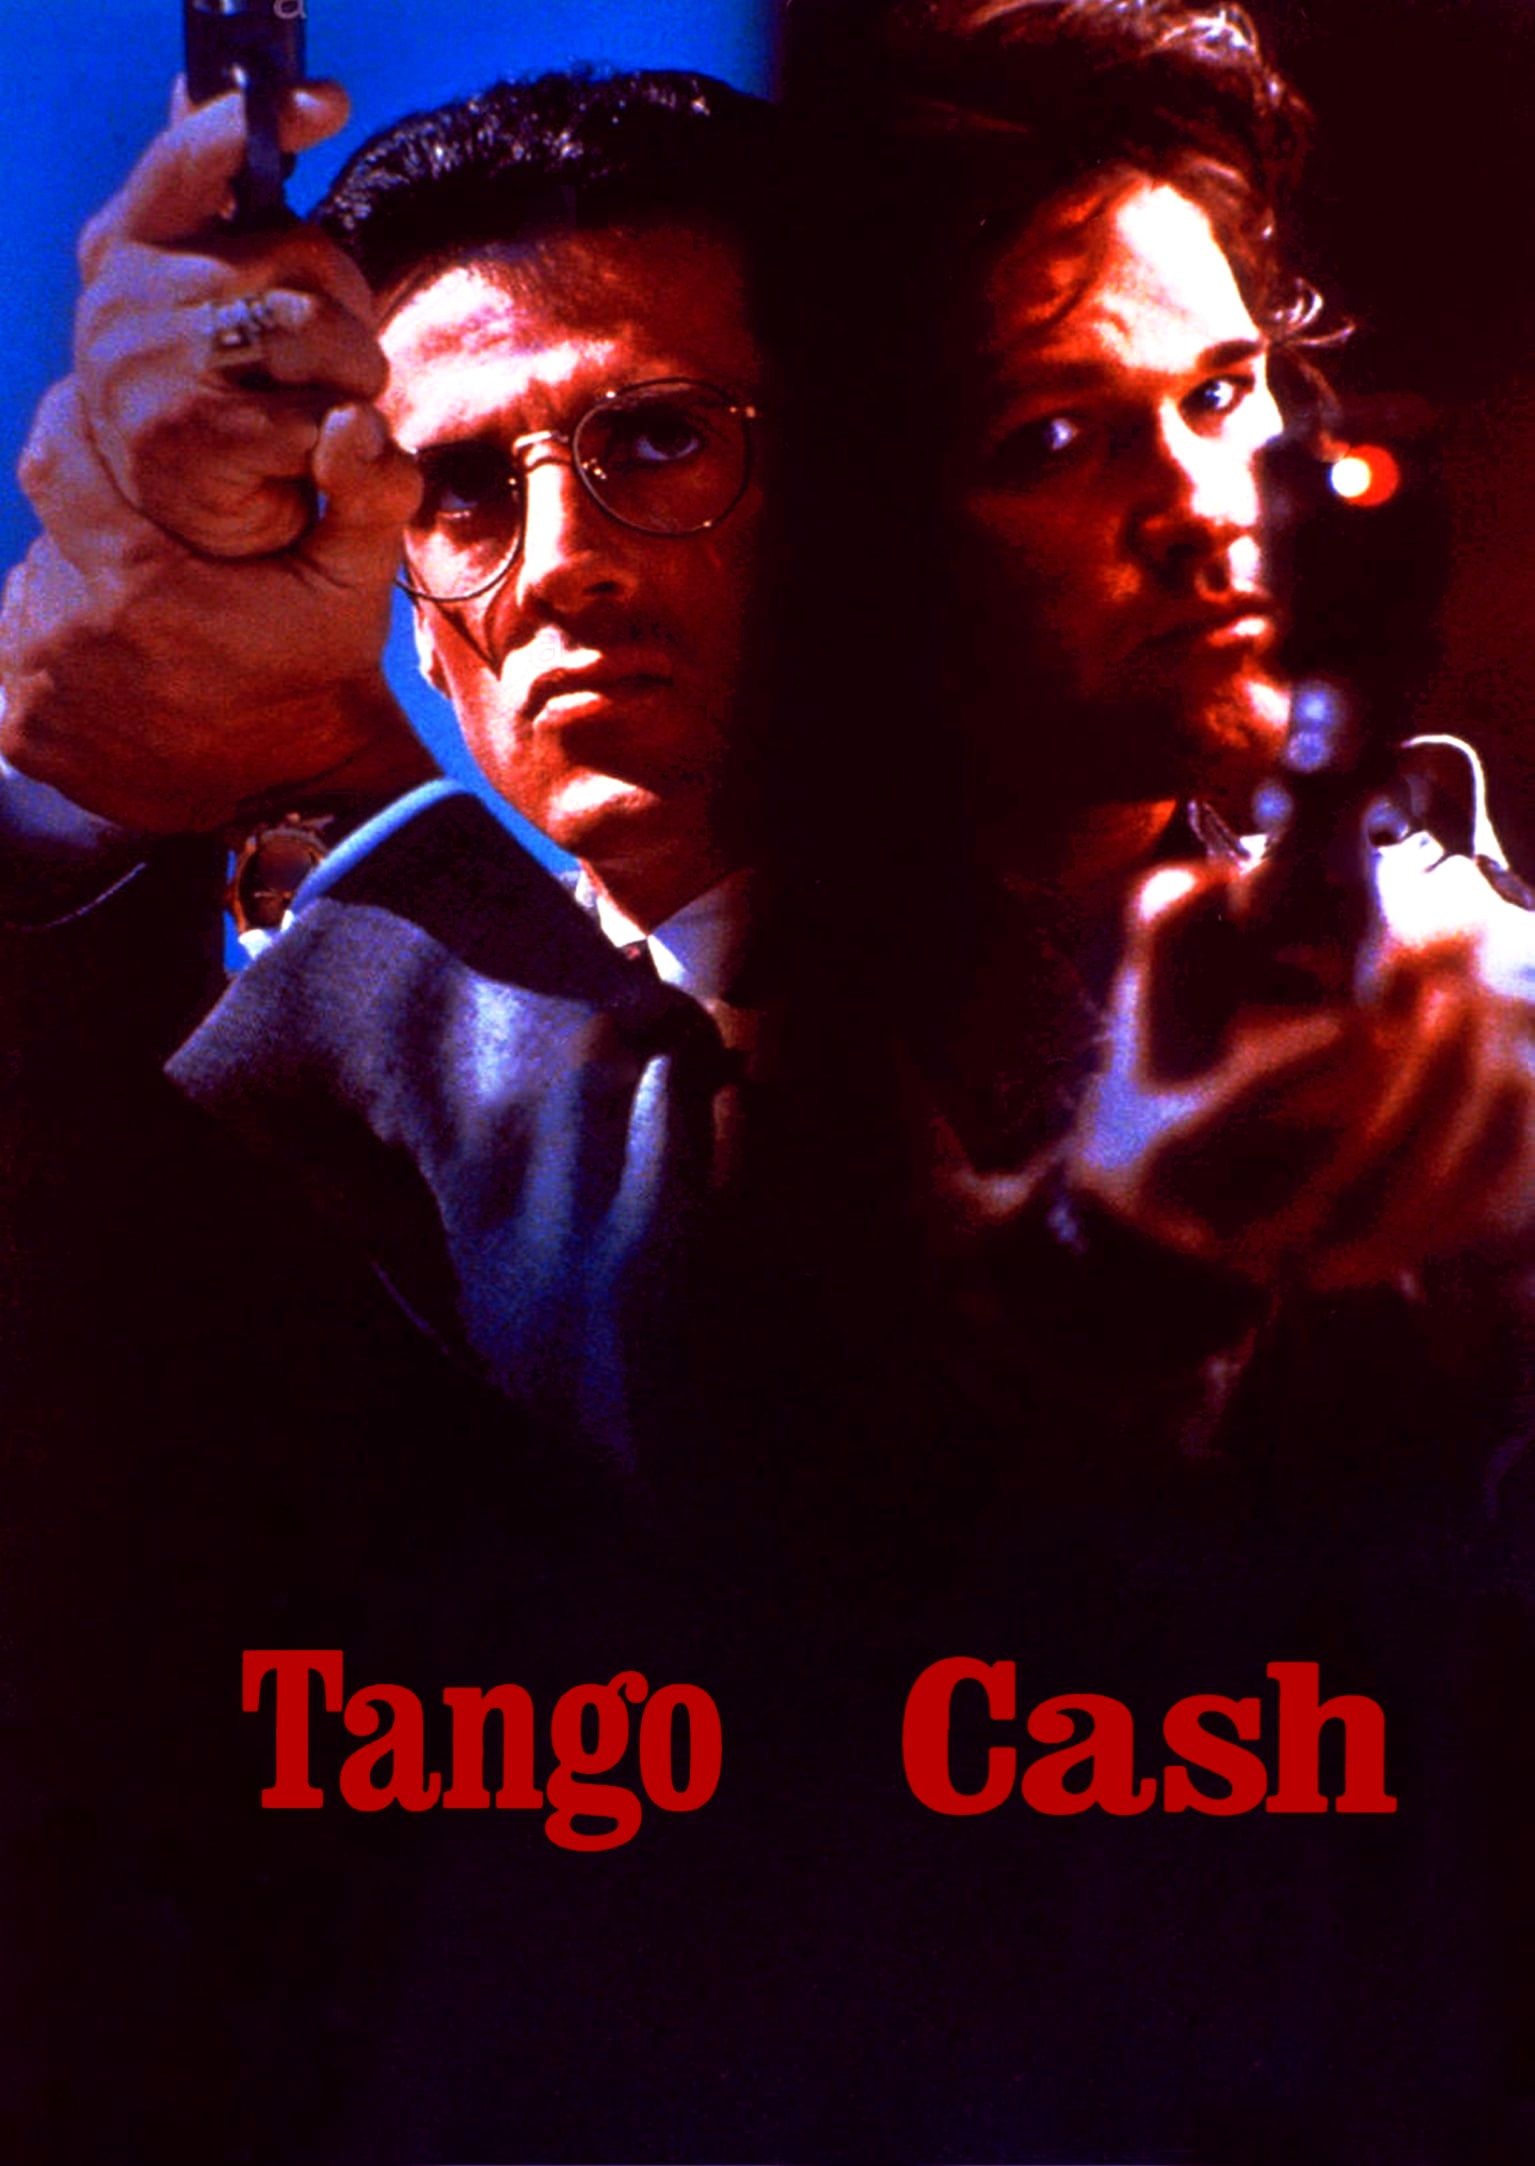 Tango and Cash, Sylvester Stallone, Kurt Russell, Iconic duo, 1540x2170 HD Handy